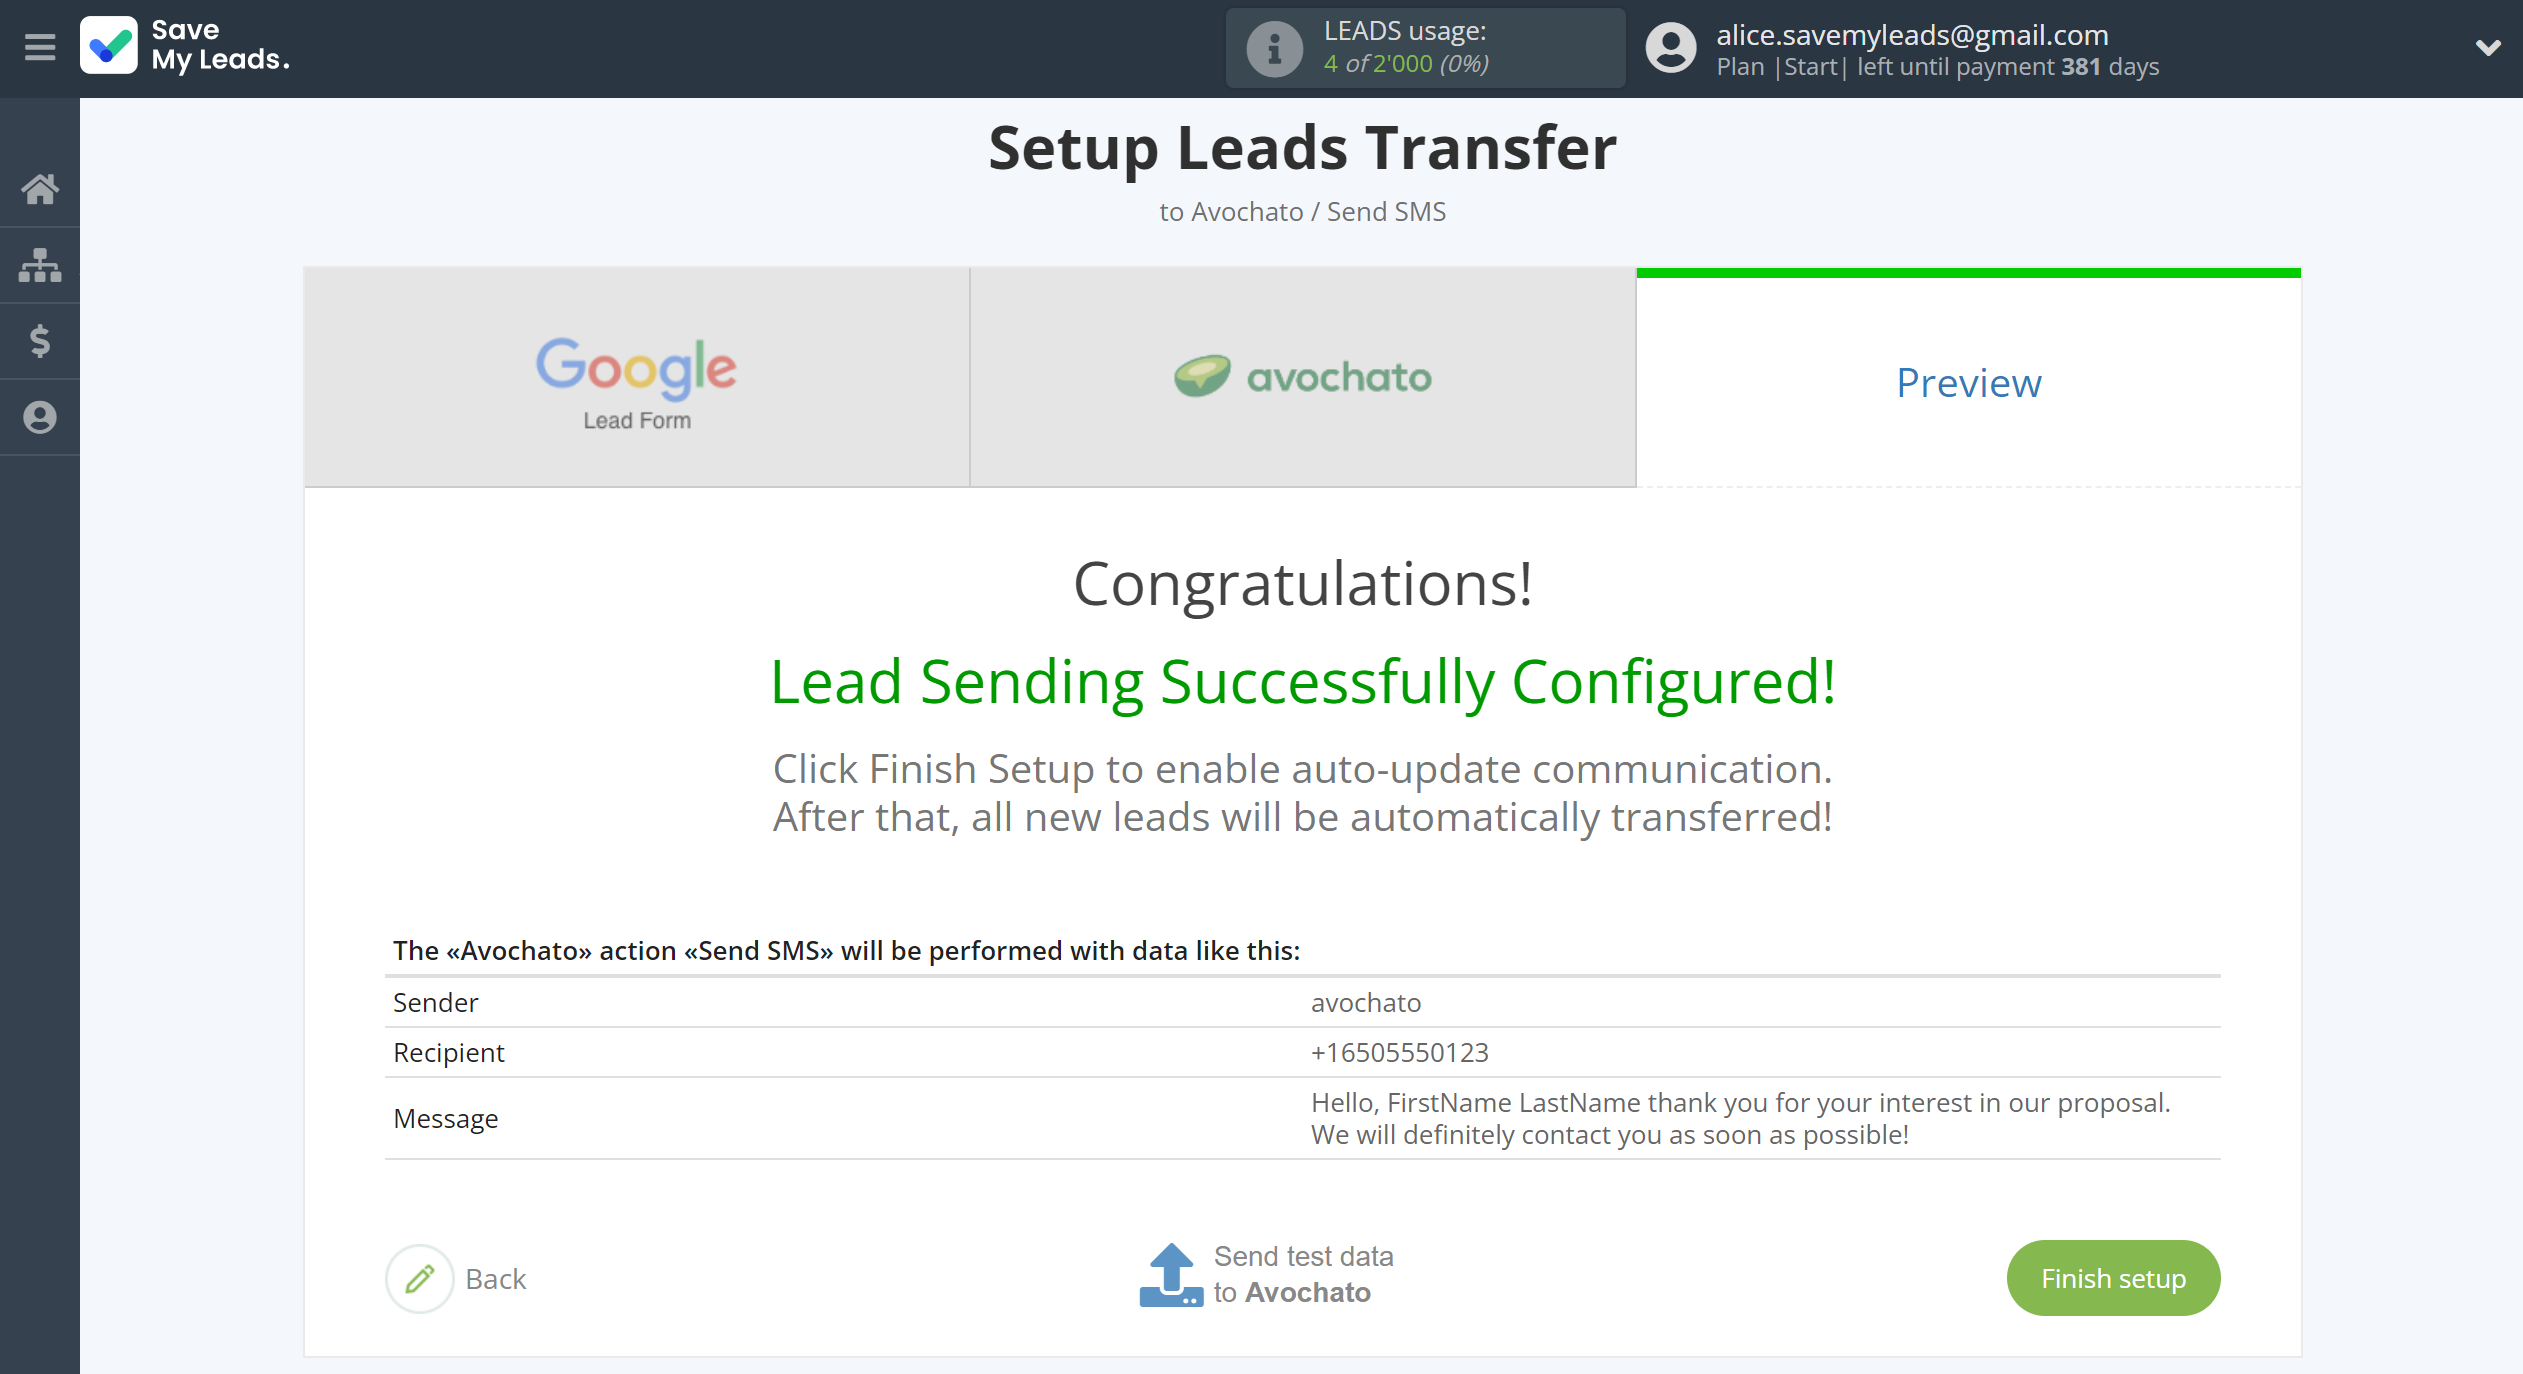 How to Connect Google Lead Form with Avochato | Test data